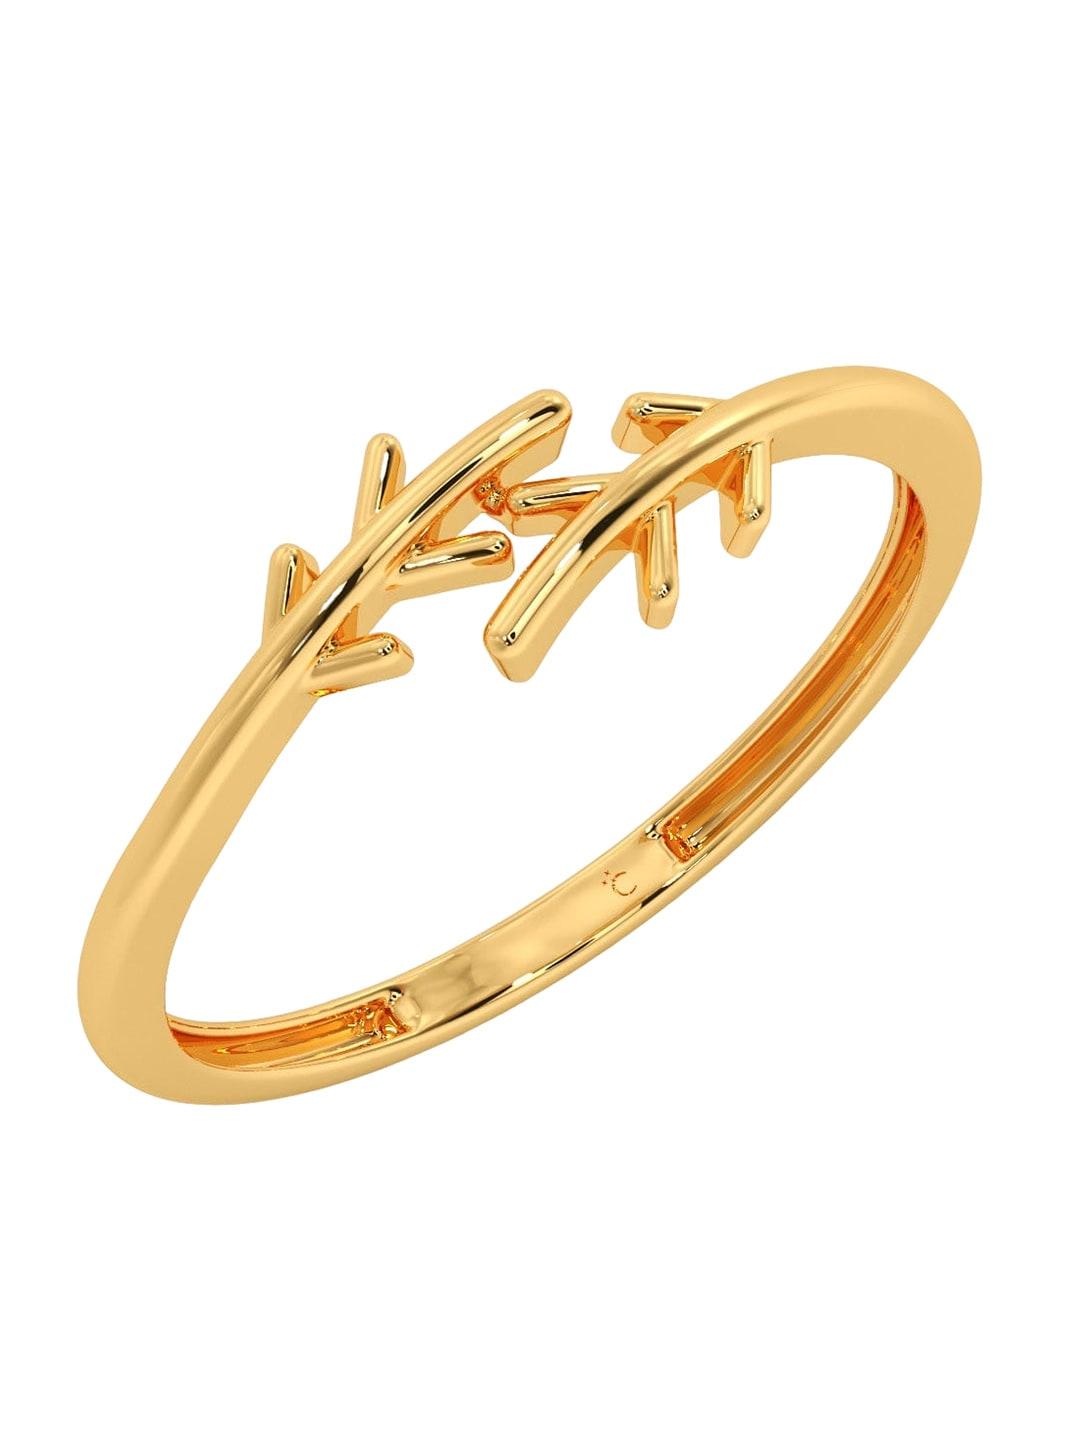 CANDERE A KALYAN JEWELLERS COMPANY 18KT Gold Ring-0.64gm